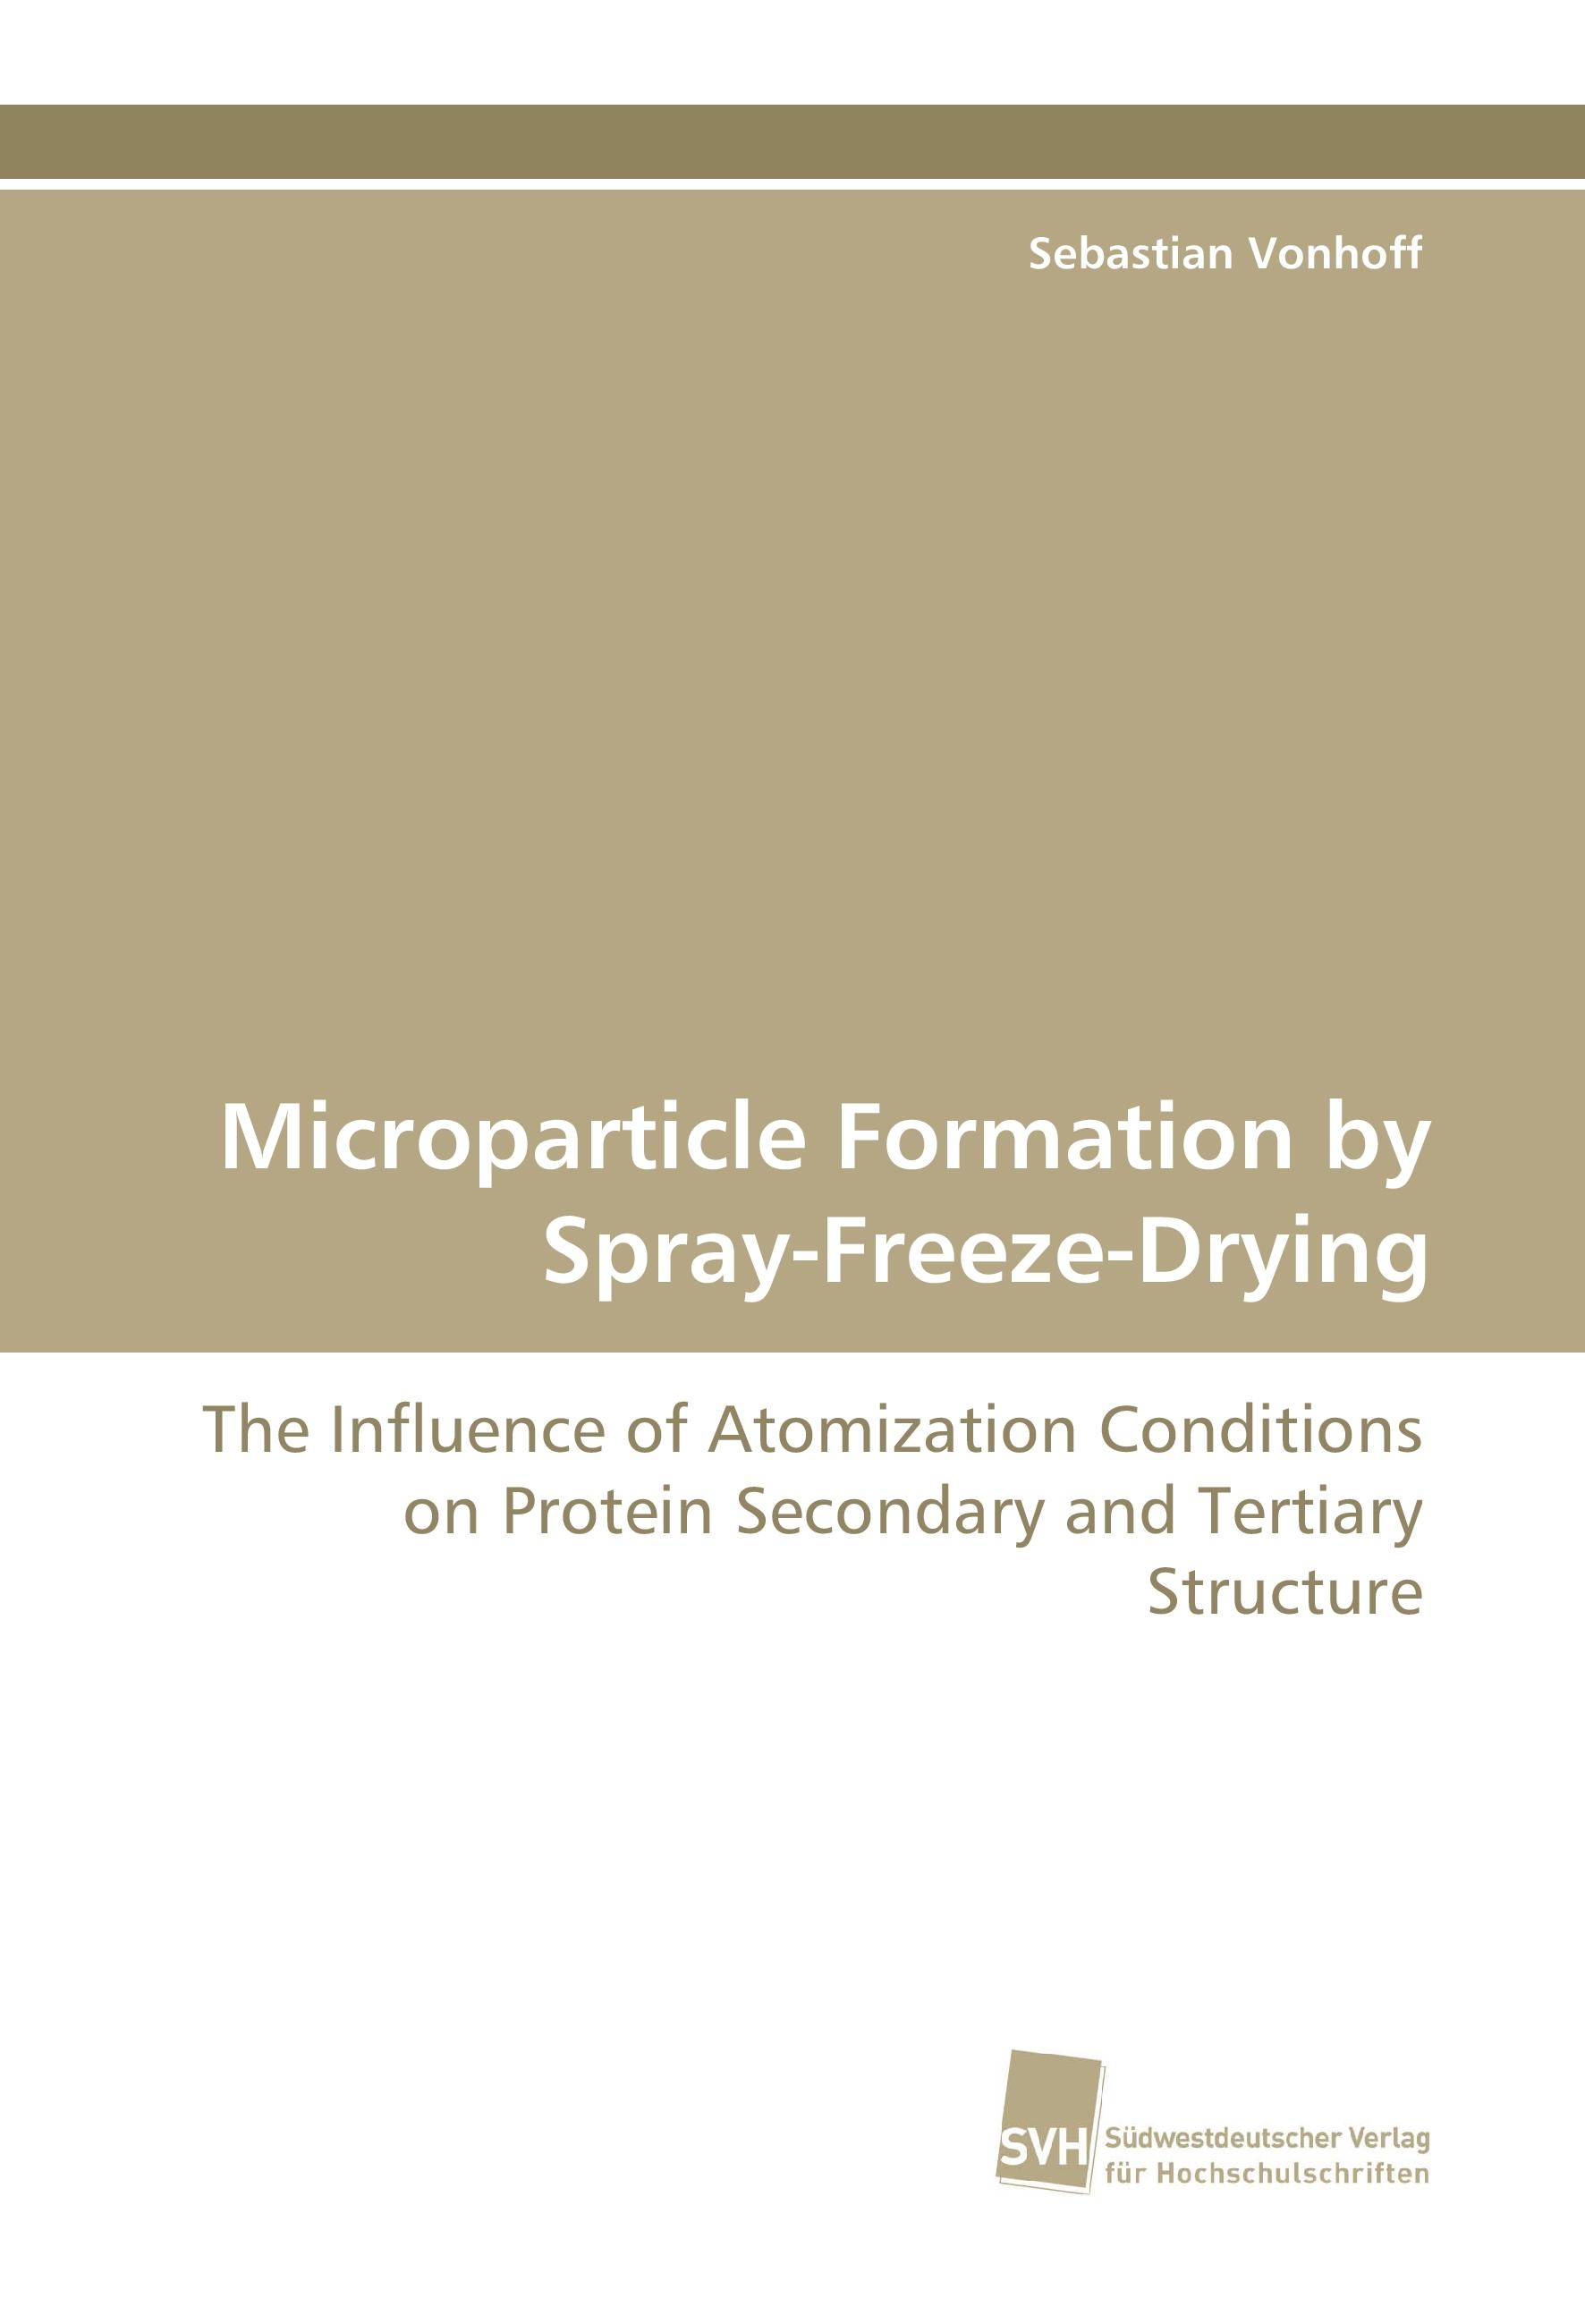 Microparticle Formation by Spray-Freeze-Drying | The Influence of Atomization Conditions on Protein Secondary and Tertiary Structure | Sebastian Vonhoff | Taschenbuch | Paperback | 188 S. | Englisch - Vonhoff, Sebastian